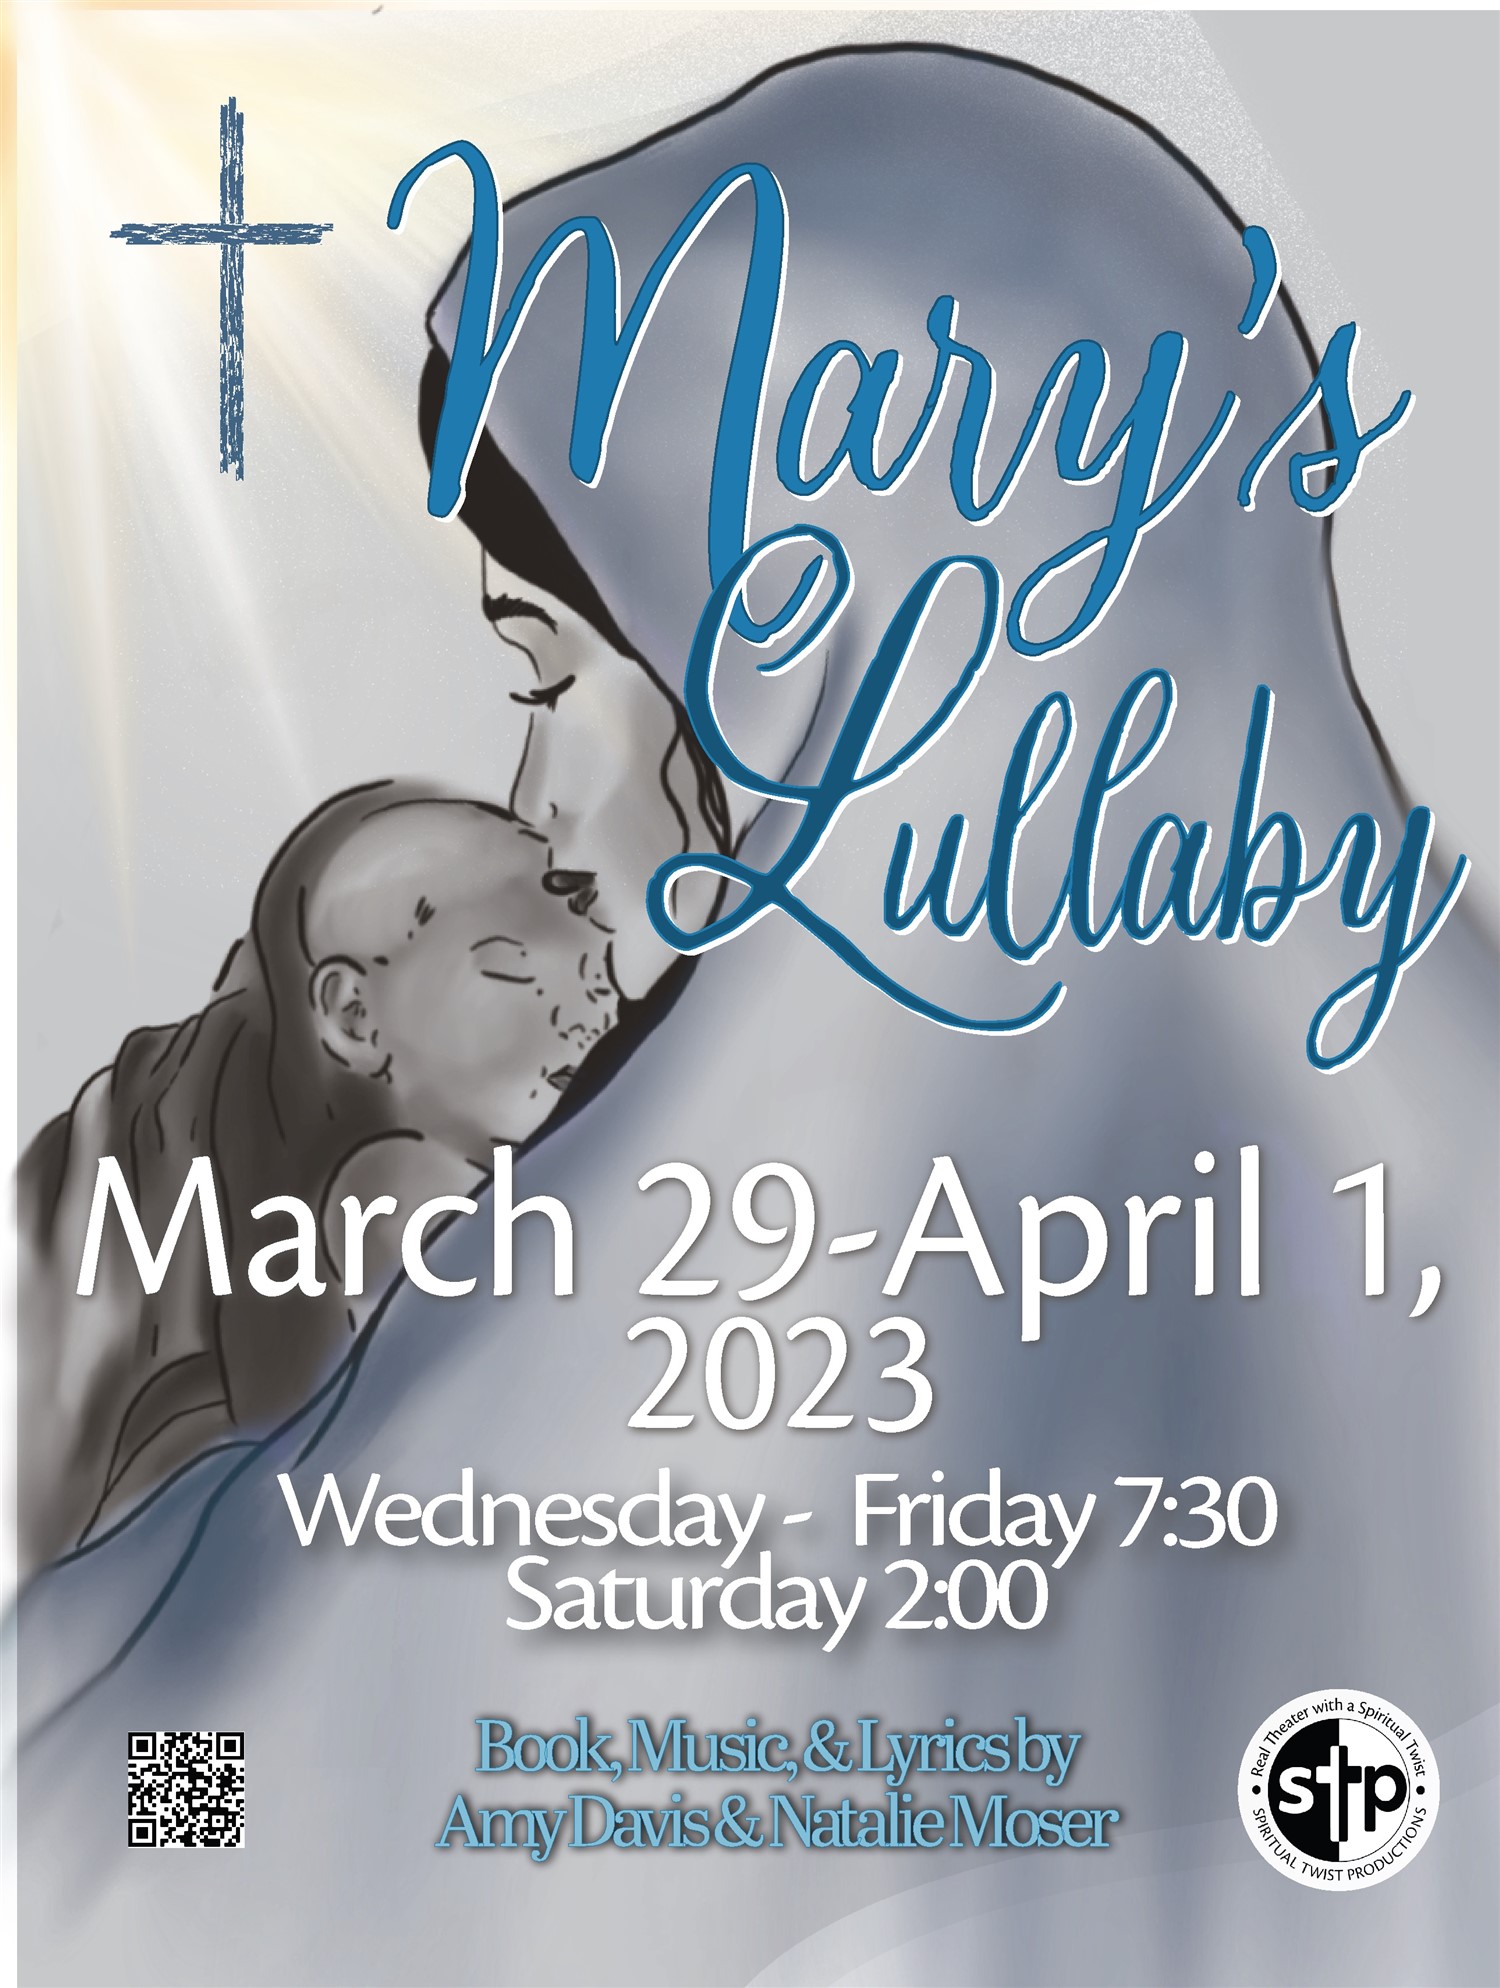 Mary's Lullaby Wednesday, March 29, 2023 @ 7:30 PM 50% off tickets for groups of 8+ on Mar 29, 19:30@Spiritual Twist Productions - Pick a seat, Buy tickets and Get information on Spiritual Twist Productions tickets.spiritualtwist.com